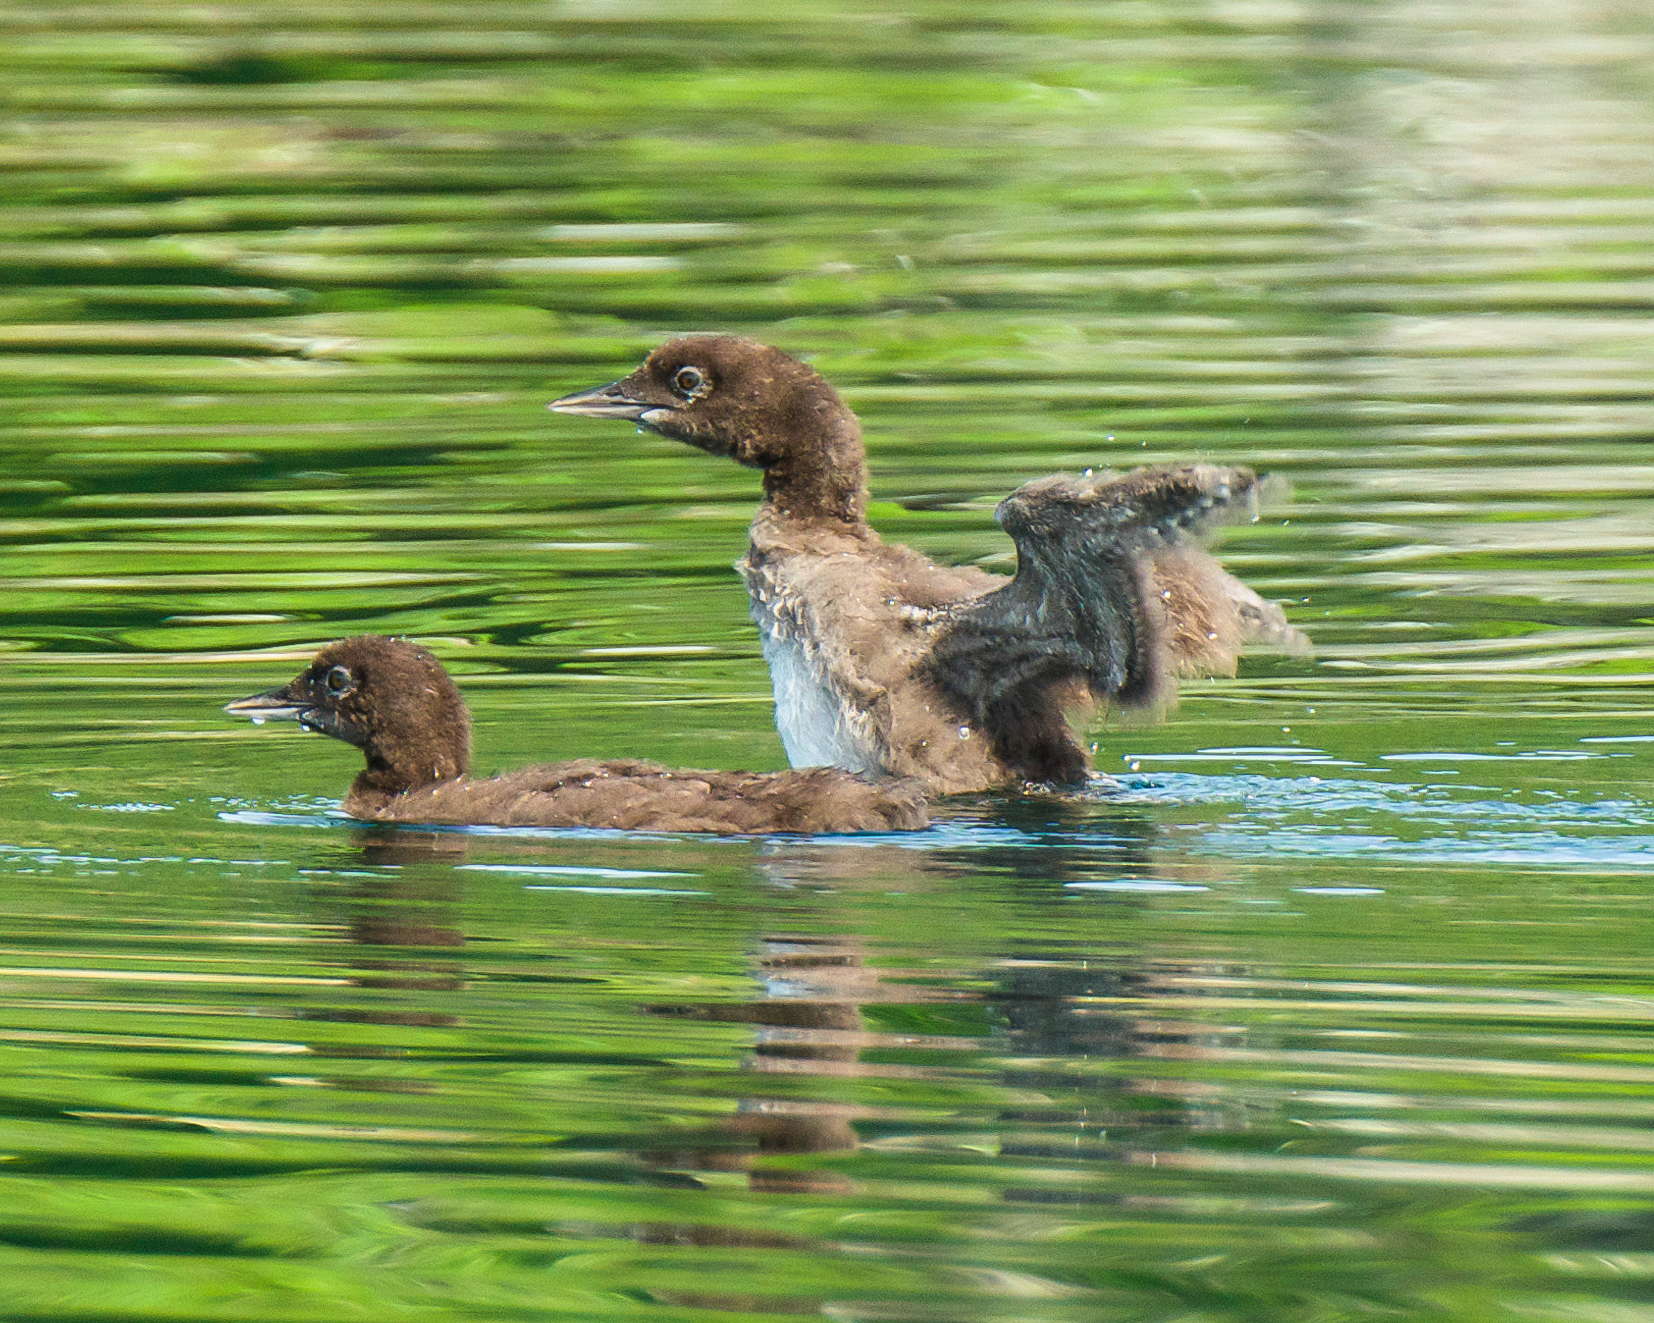   Young loons stretching their muscles. &nbsp;They will do this all of their lives. &nbsp;These two are 4 weeks old. &nbsp; 7/29/15  